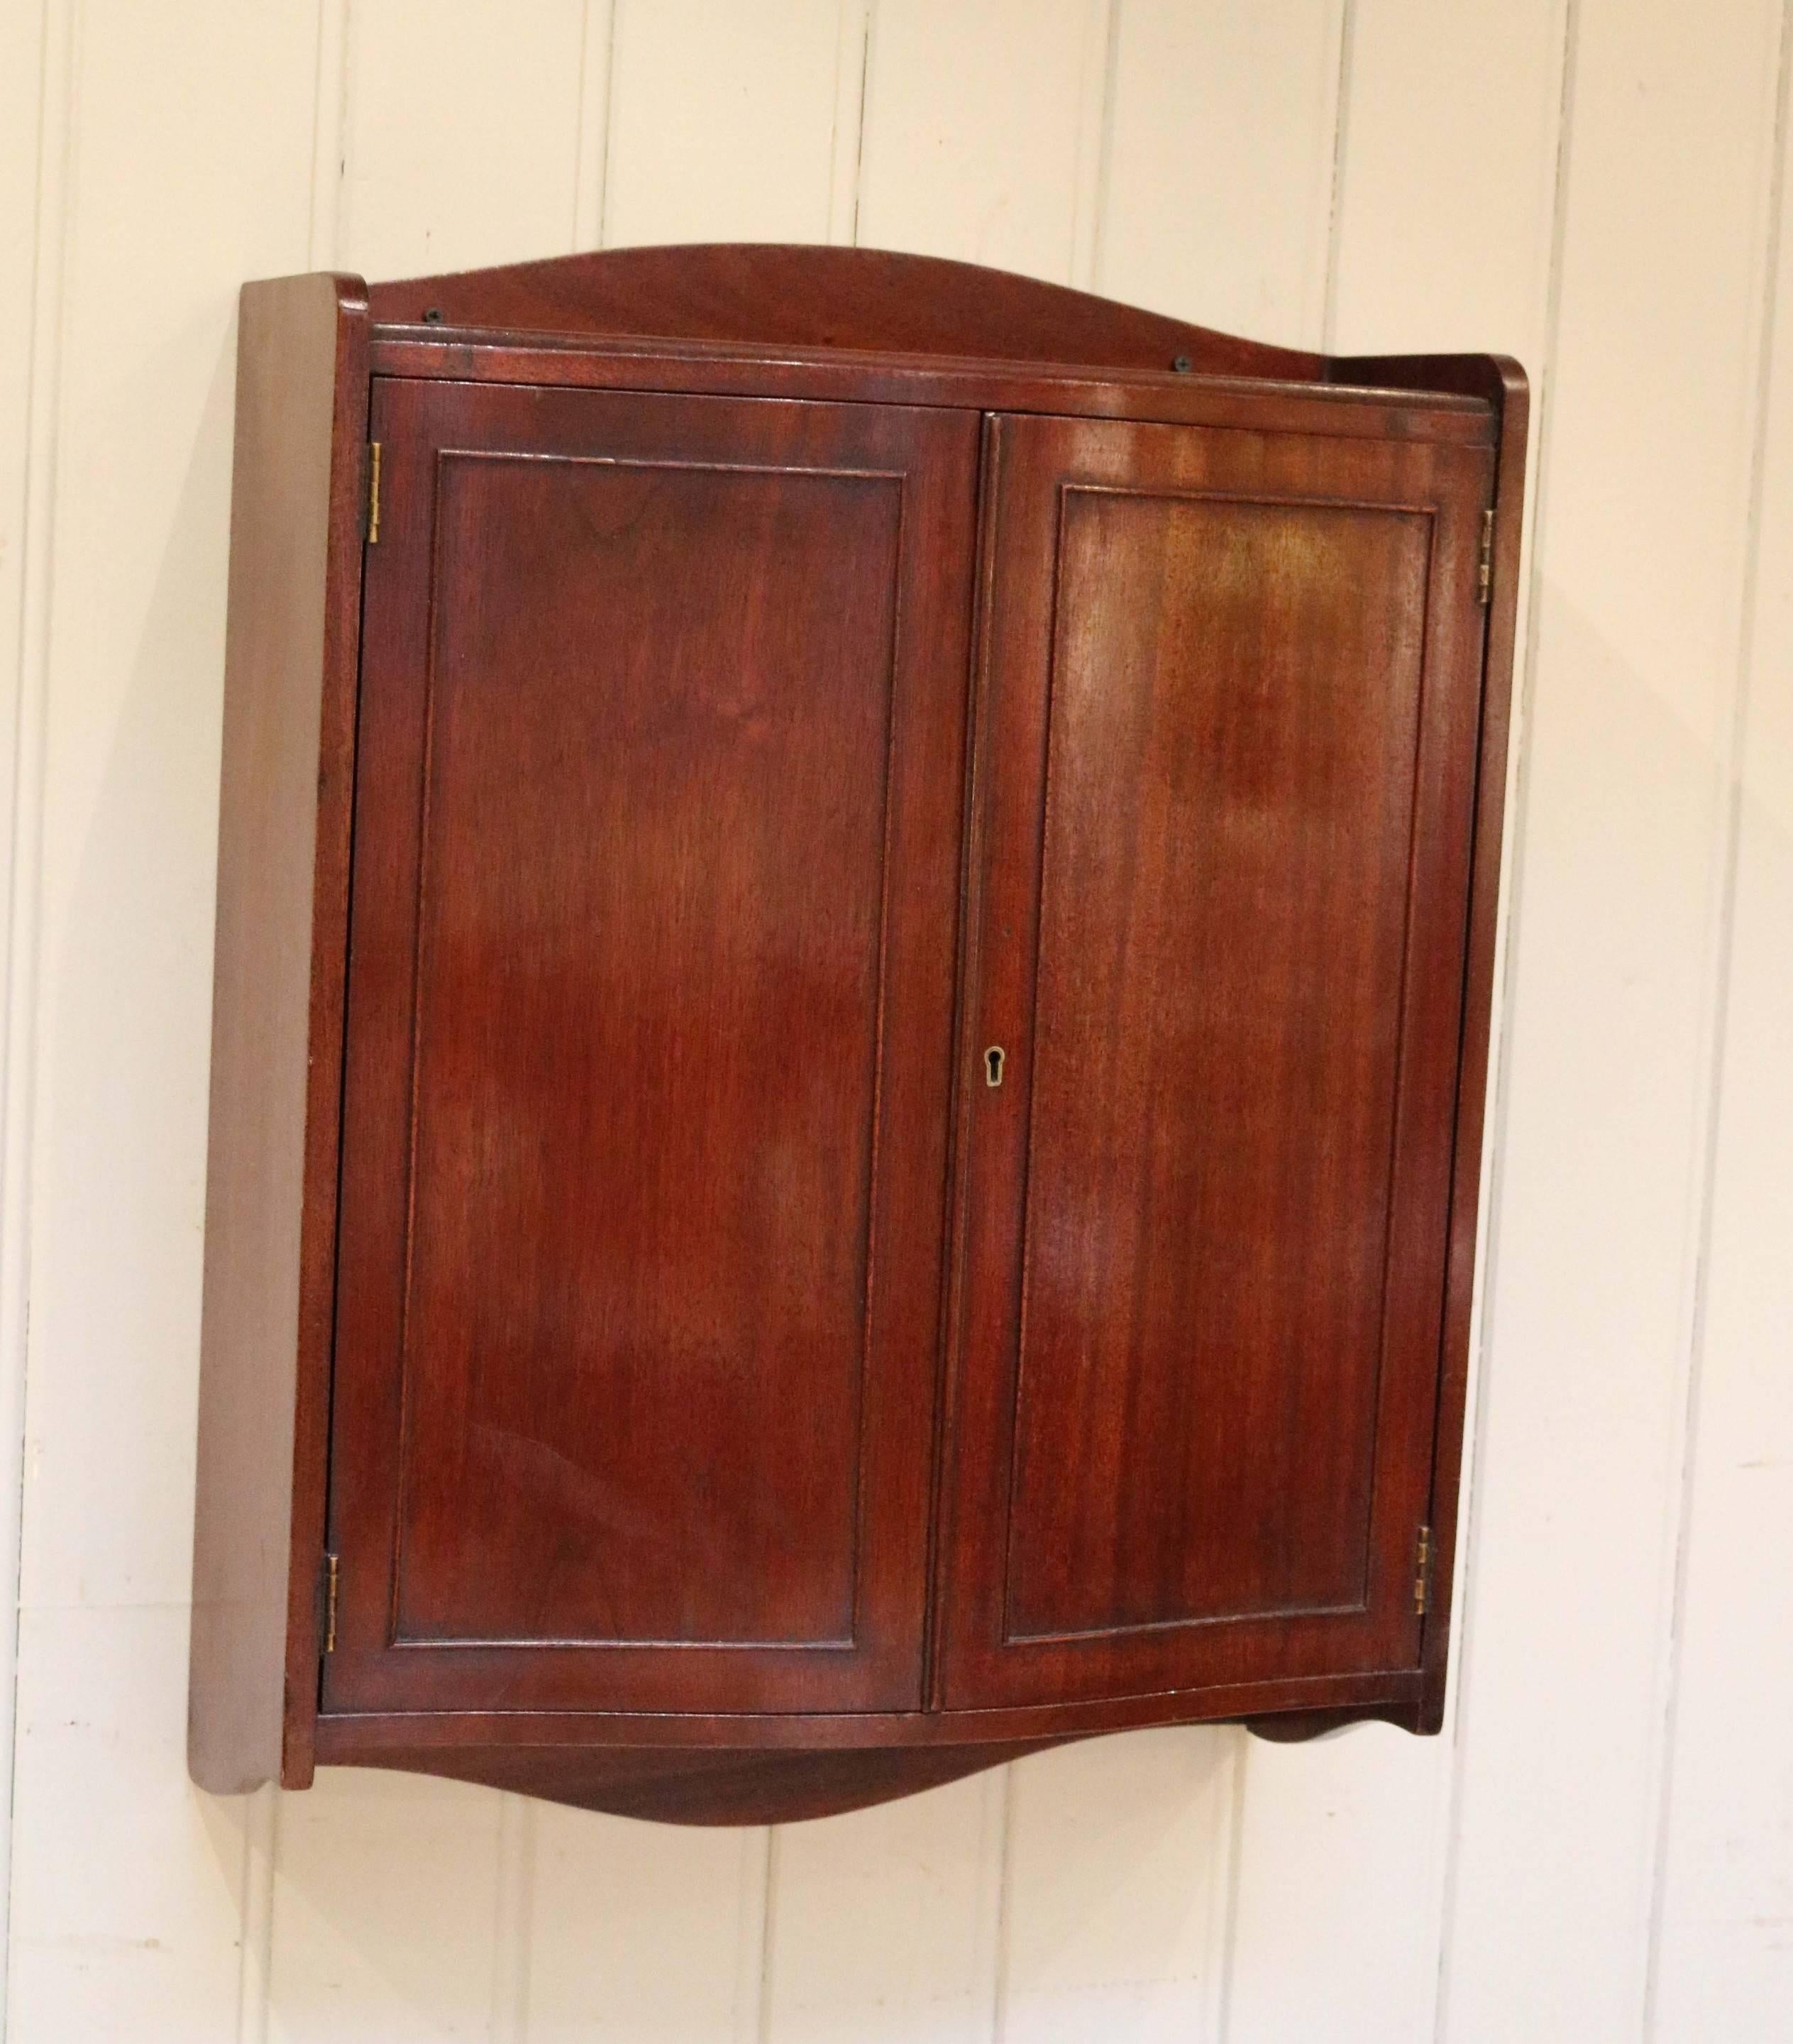 Edwardian mahogany two-door wall cabinet having a serpentine front with a fixed internal shelf.